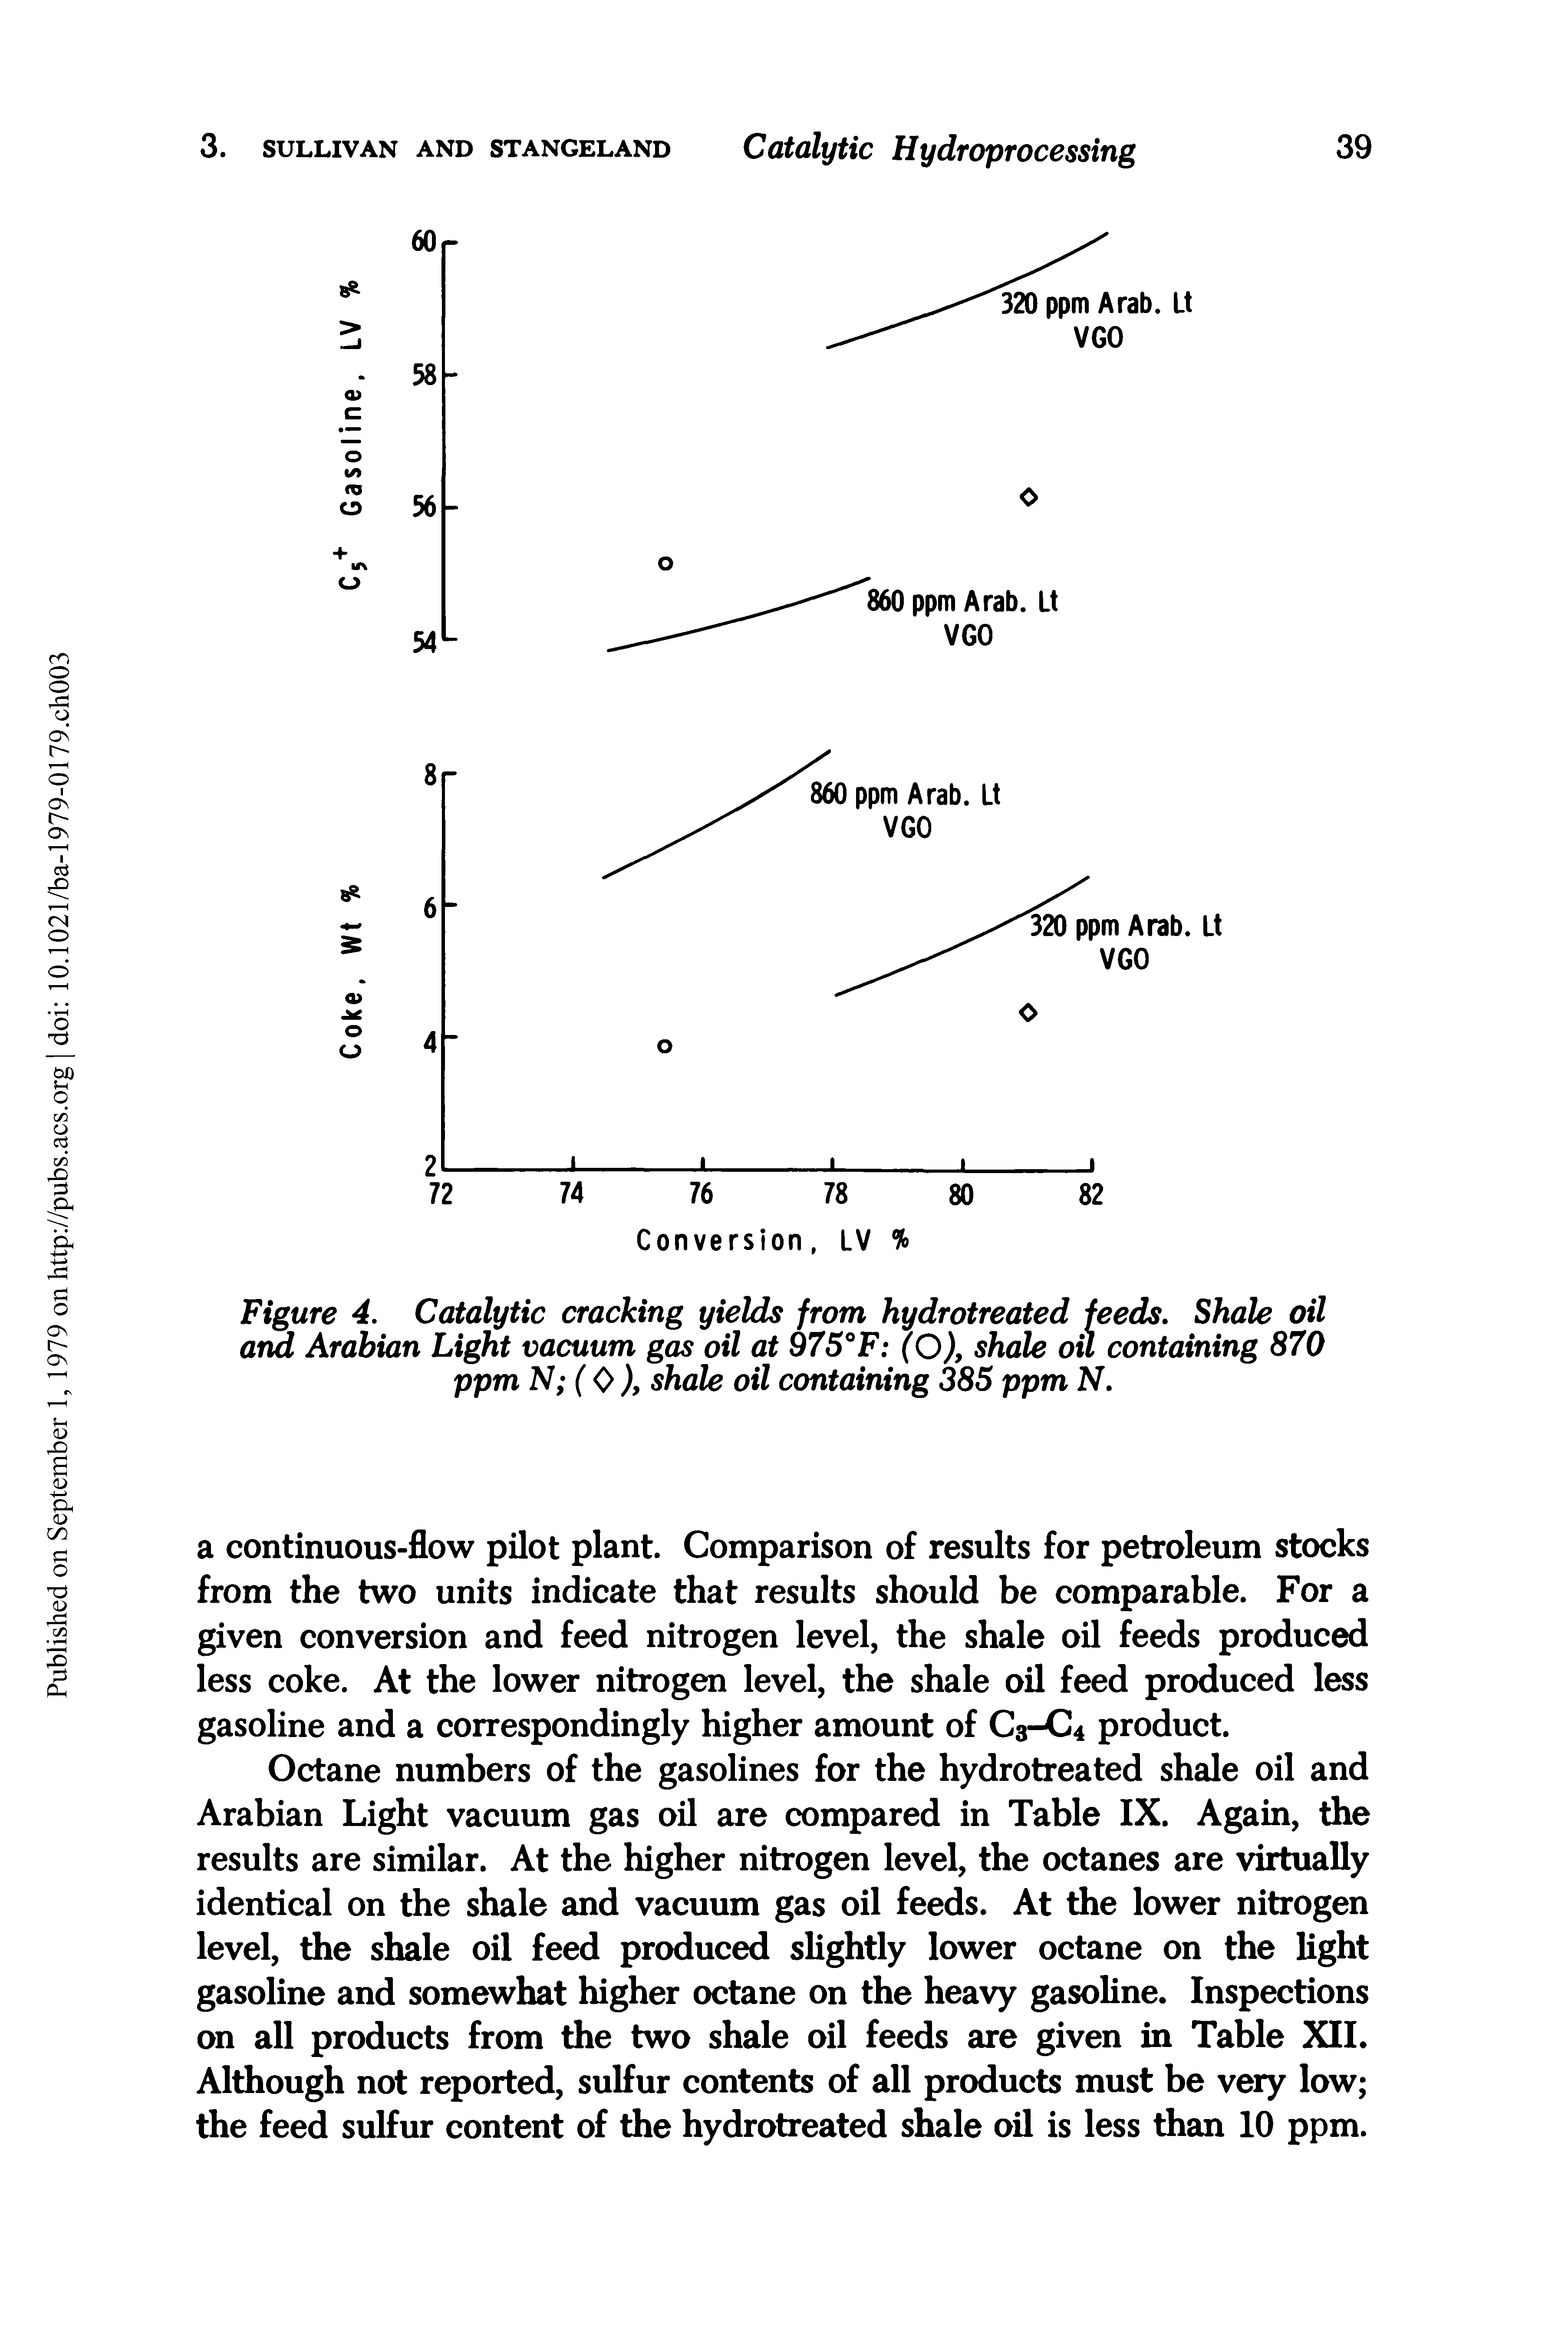 Figure 4. Catalytic cracking yields from hydrotreated feeds. Shale oil arm Arabian Light vacuum gas oil at 975°F (O), shale oil containing 870 ppm N (0), shale oil containing 385 ppm N.